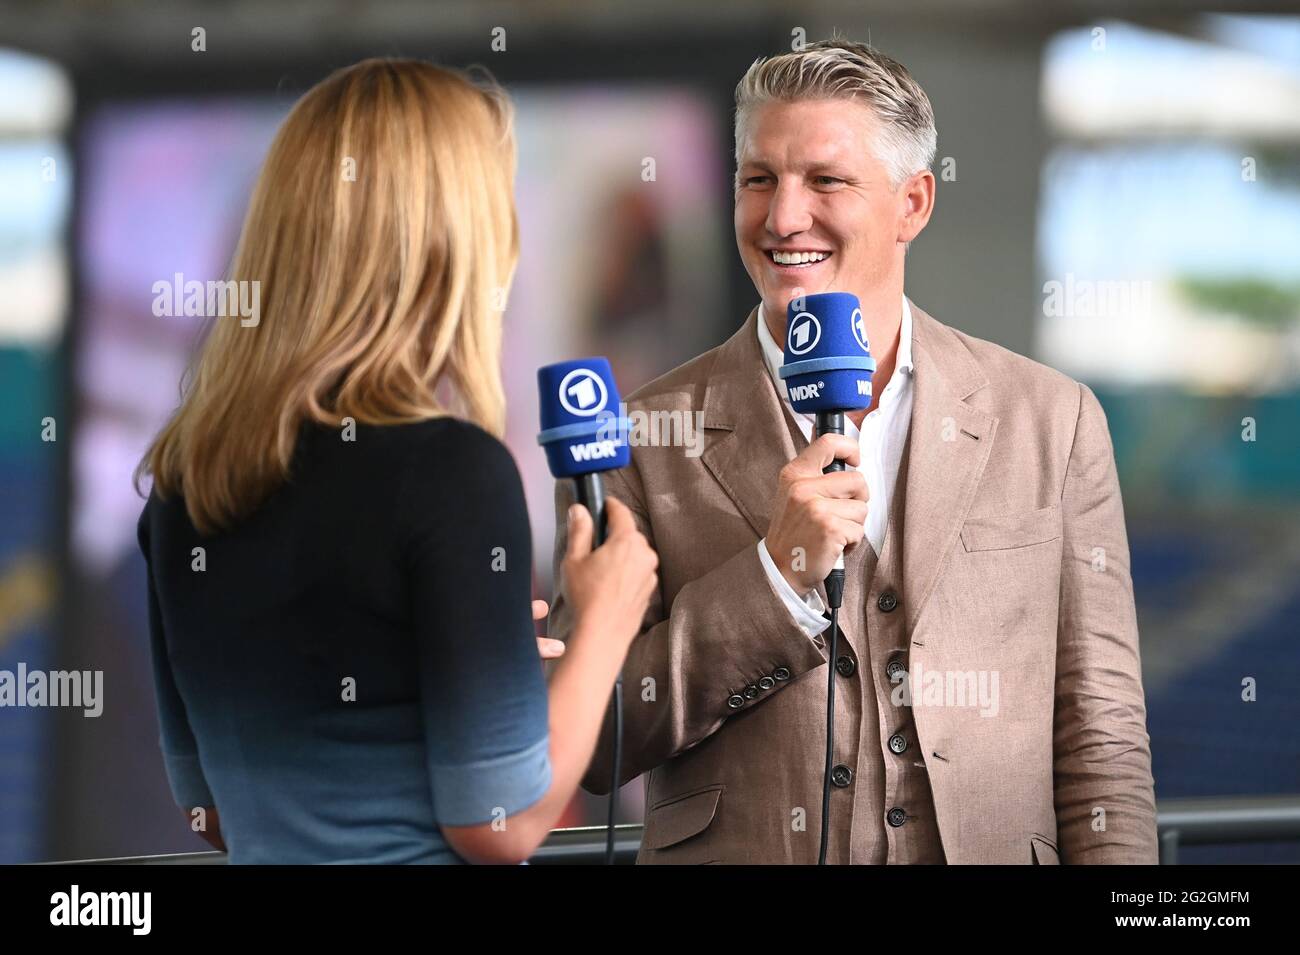 11 June 2021, Lazio, Rom: Football: European Championship, preliminary round, Group A, Turkey - Italy at the Stadio Olimpico di Roma. Jessy Welmer, ARD presenter, and Bastian Schweinsteiger, ARD TV expert, are in the stadium. Important: For editorial news reporting purposes only. Not used for commercial or marketing purposes without prior written approval of UEFA. Images must appear as still images and must not emulate match action video footage. Stock Photo